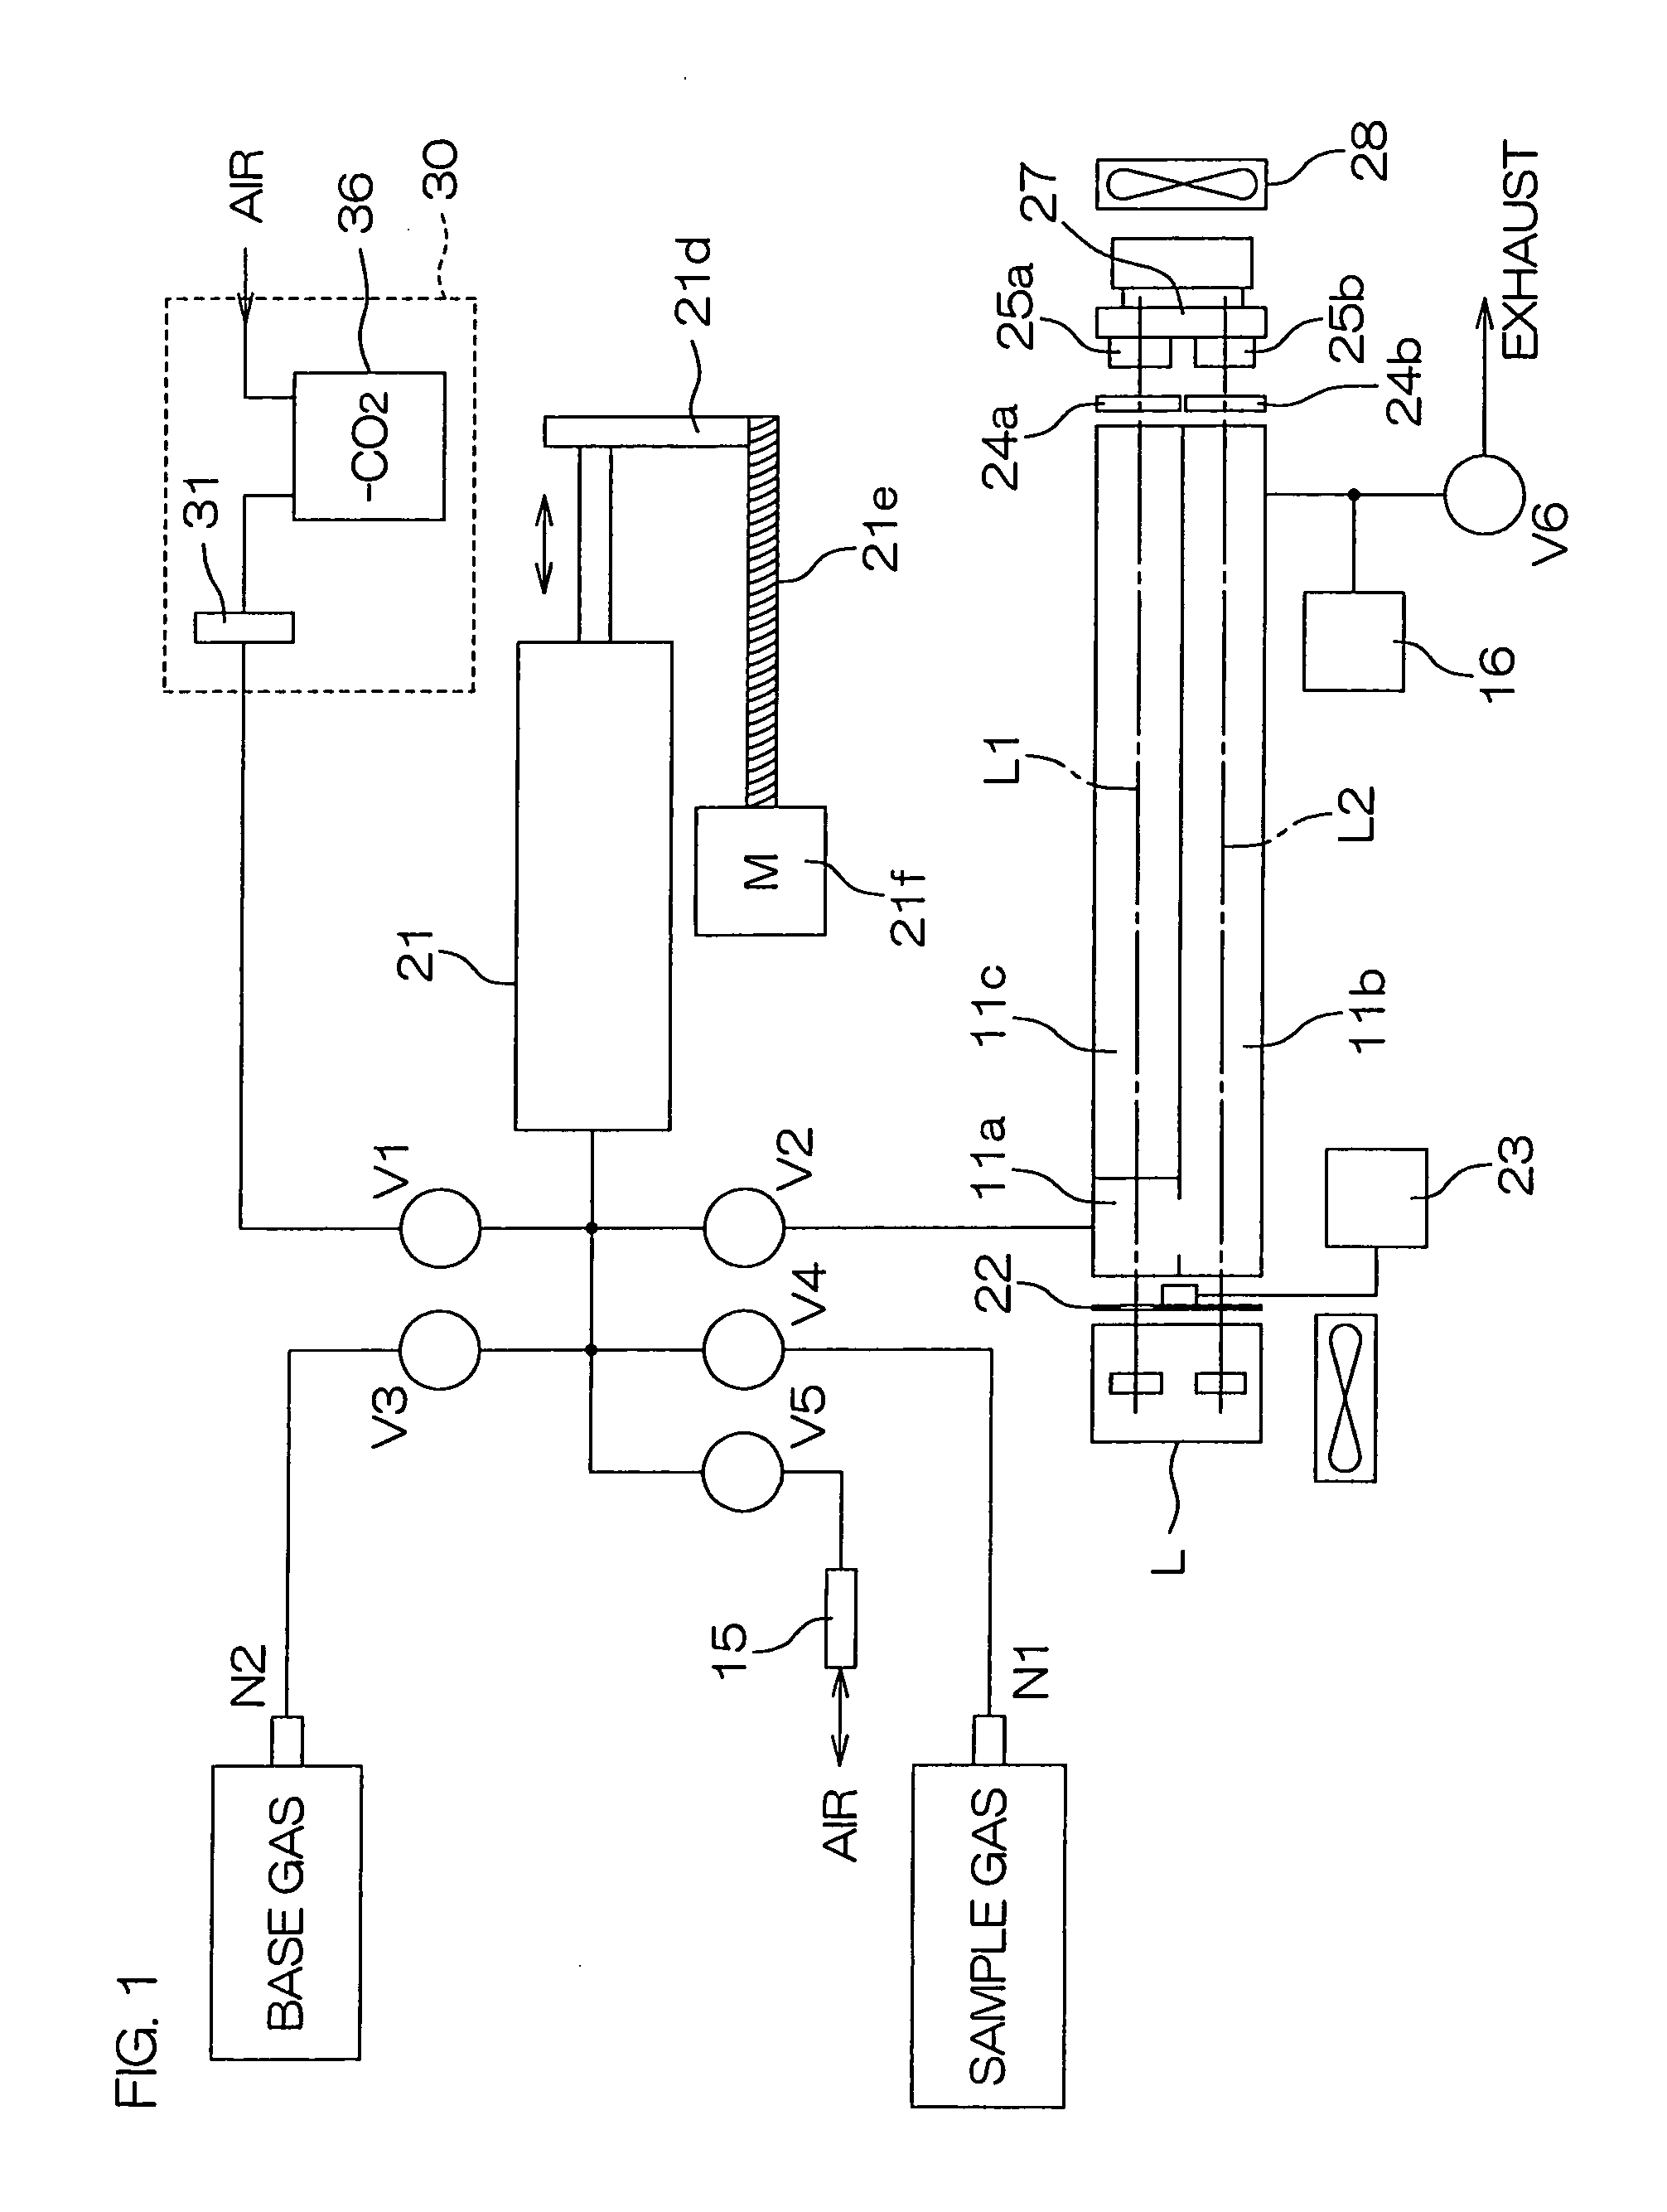 Method of Exhaled Gas Measurement and Analysis and Apparatus Therefor